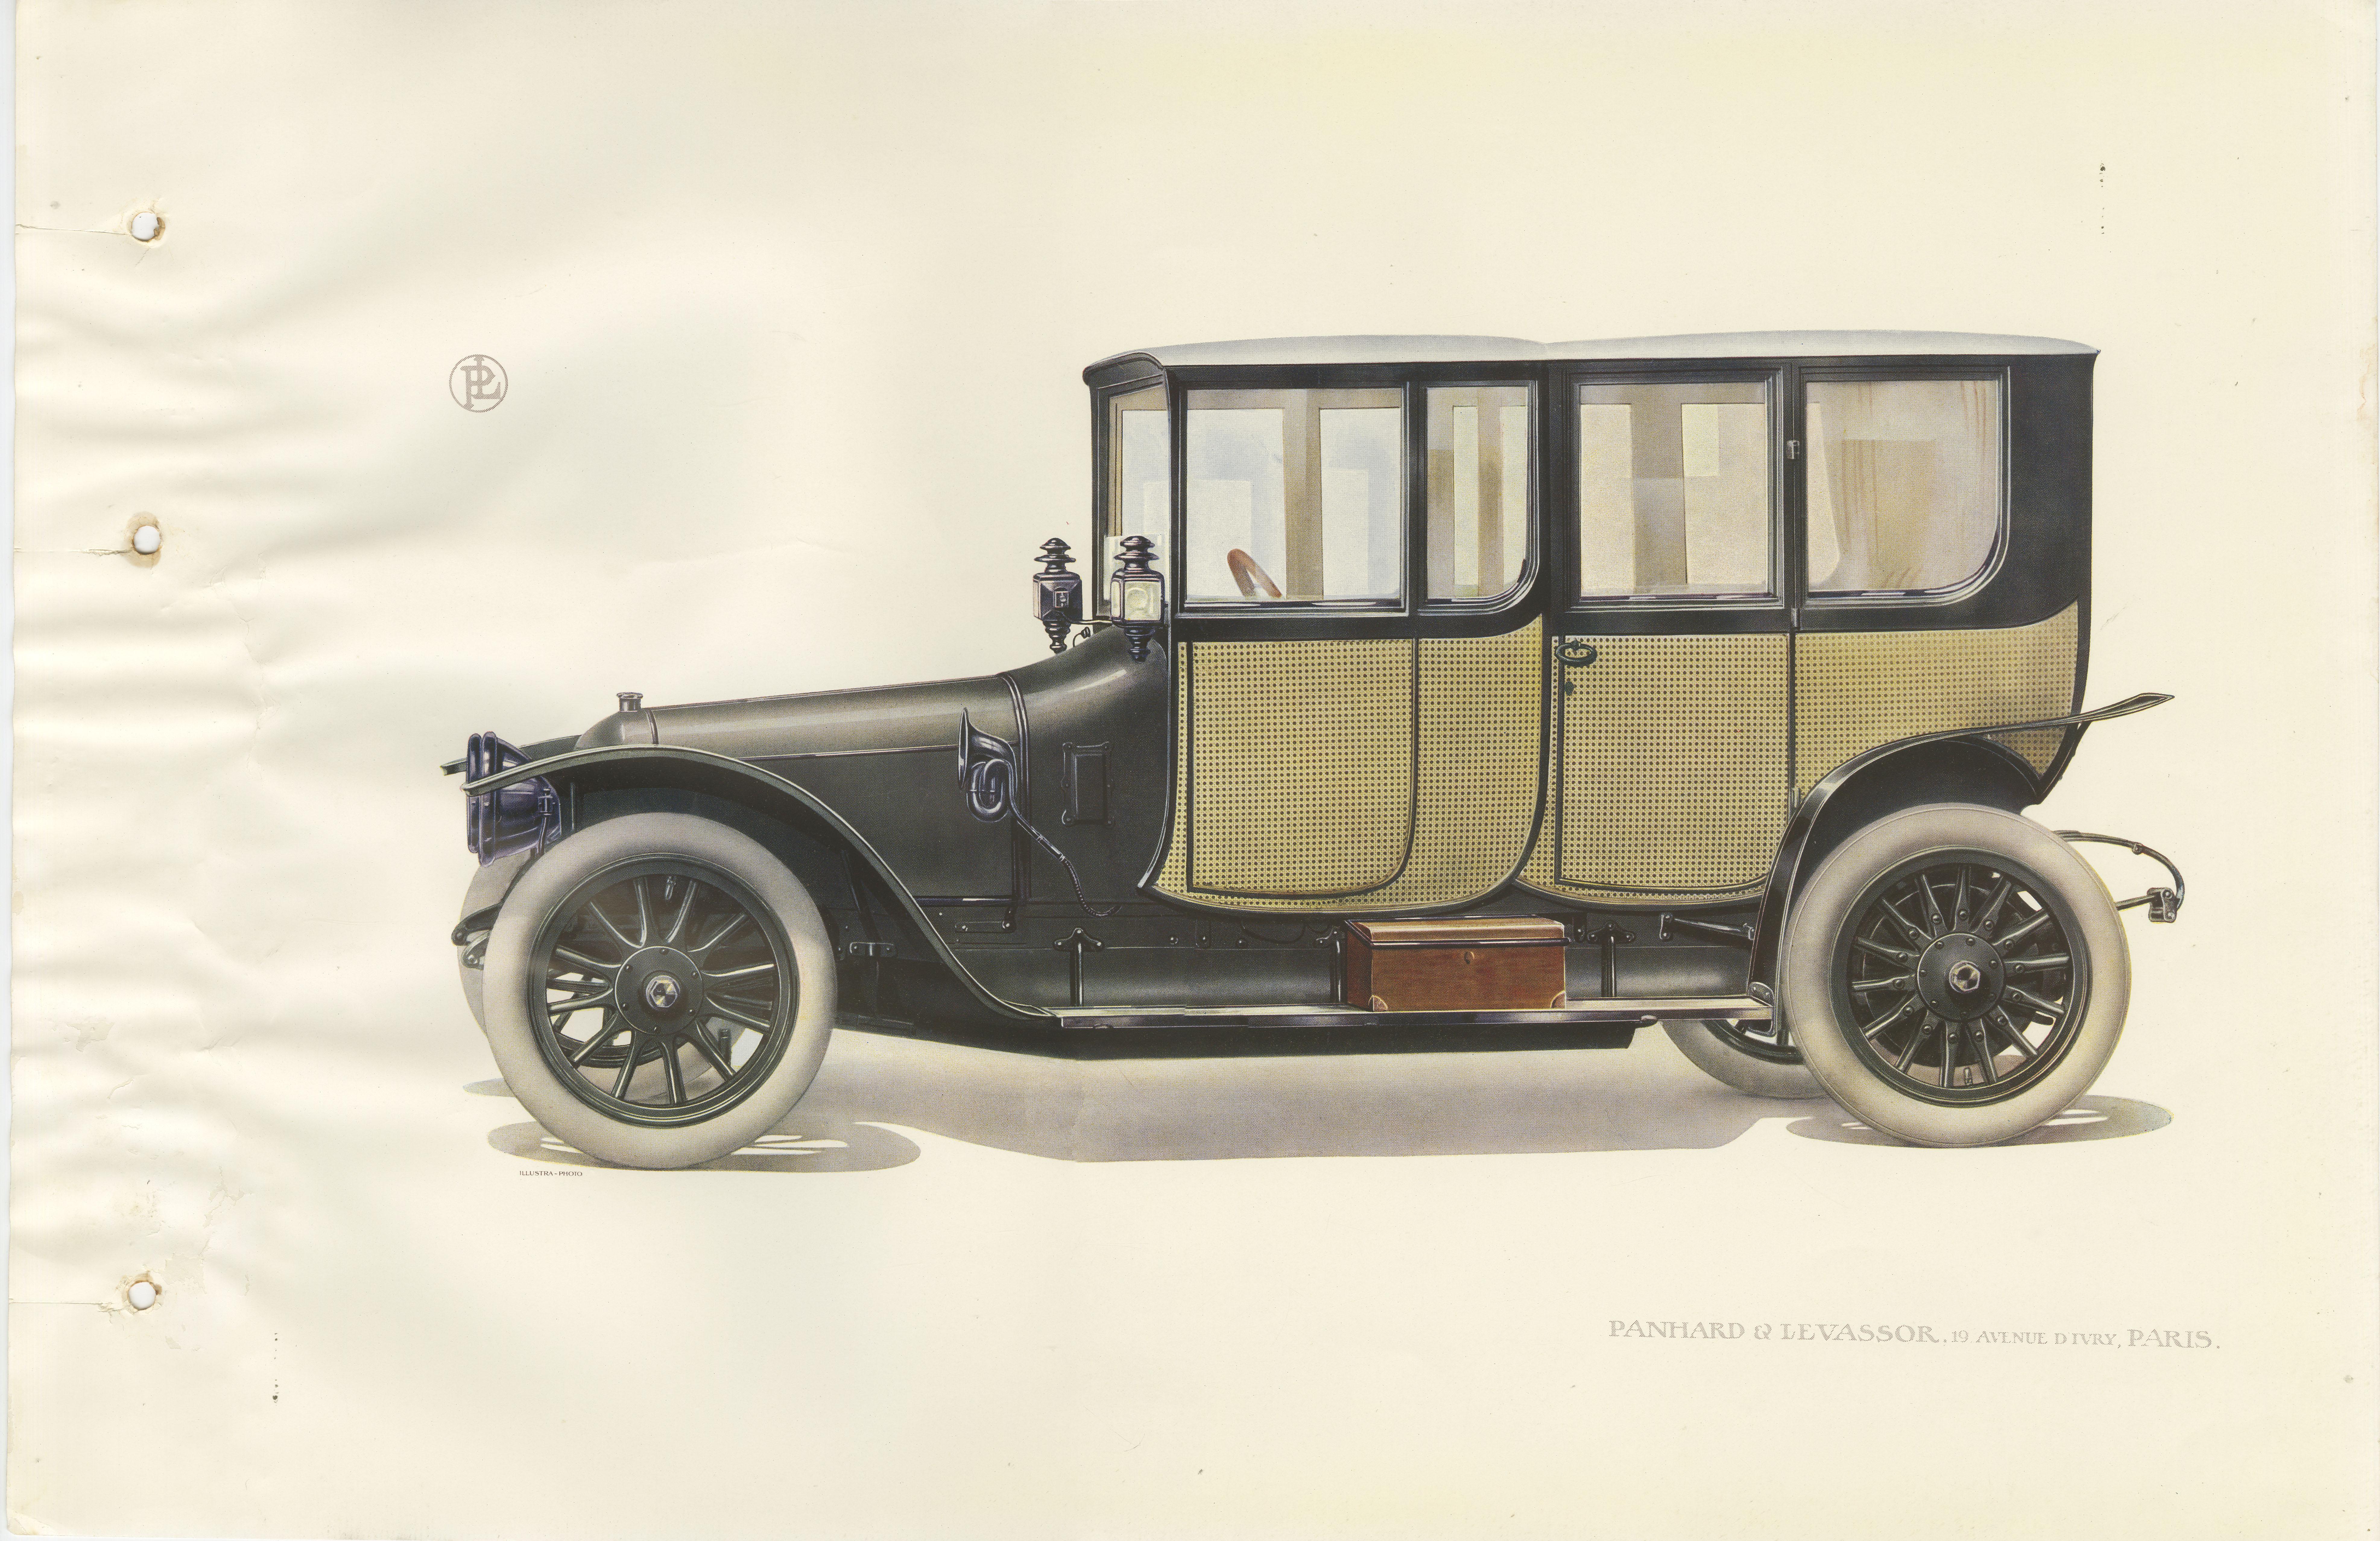 Antique print of a Panhard et Levassor double coupe conduite car. This print originates from a rare catalog of the exclusive French brand Panhard & Levassor from 1914.

Panhard was a French motor vehicle manufacturer that began as one of the first